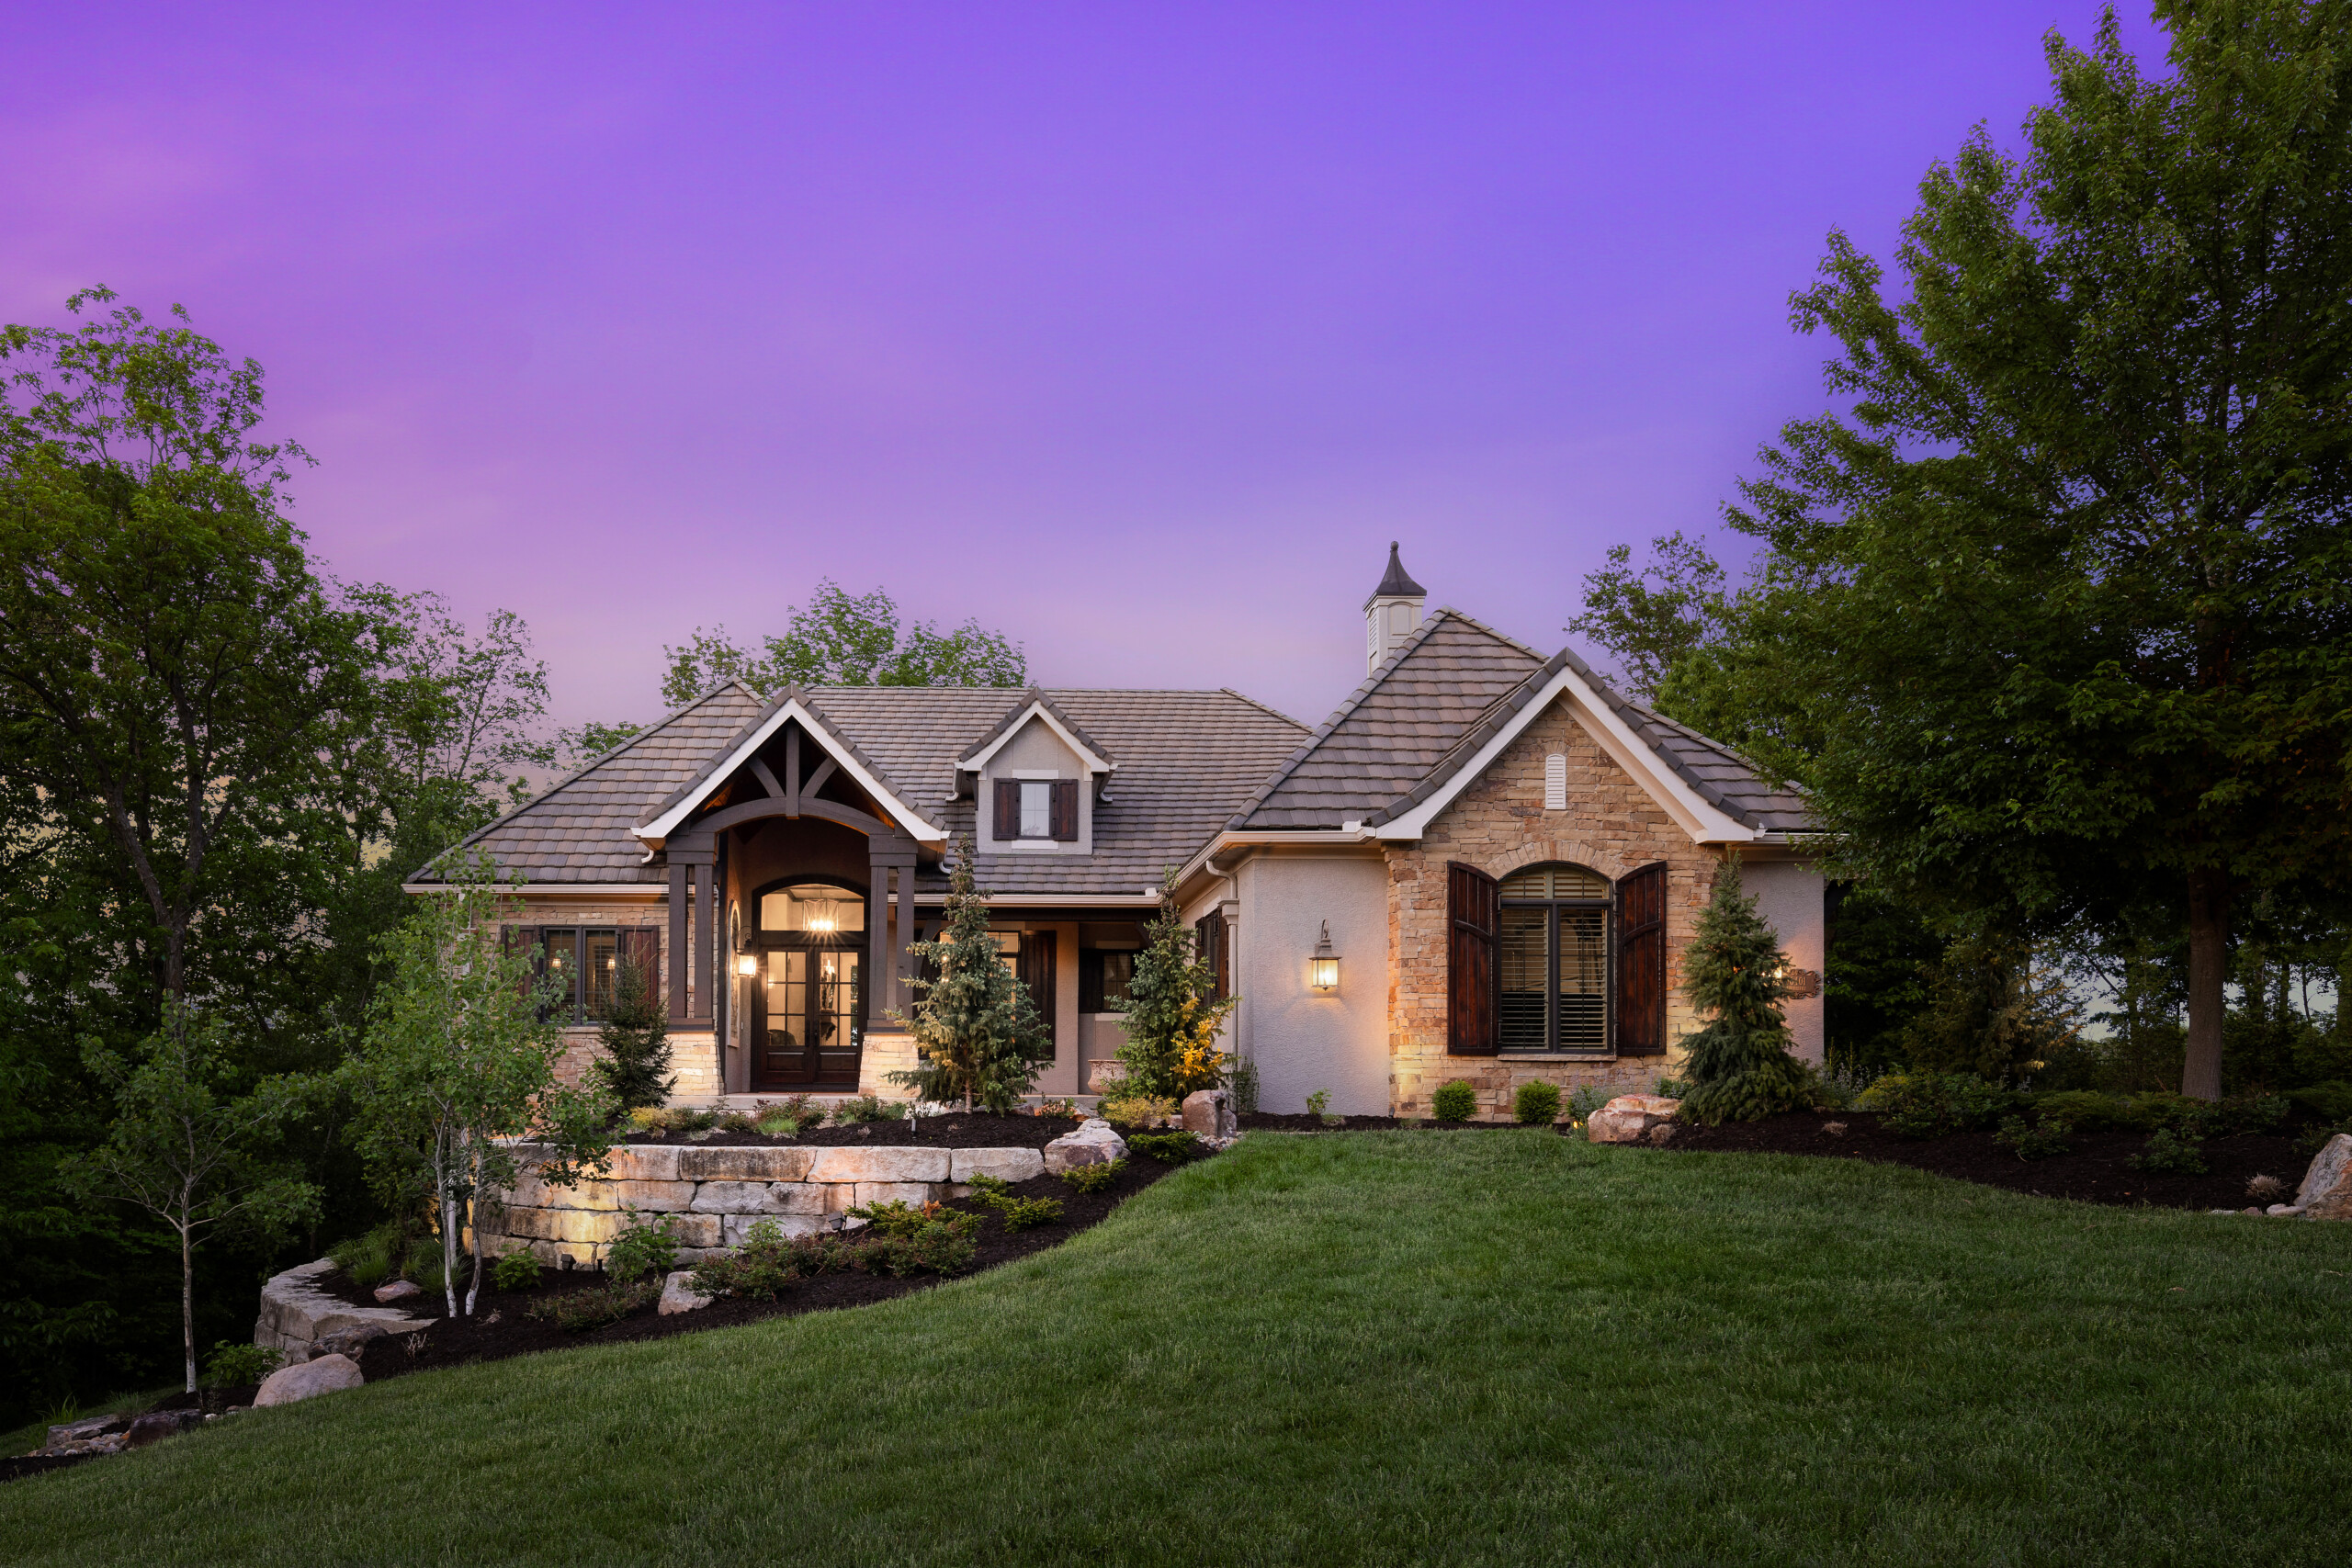 Gorgeous luxury home photo from Malfer & Associates showing how landscaping, and professional services can help you sell your home faster and for more money.